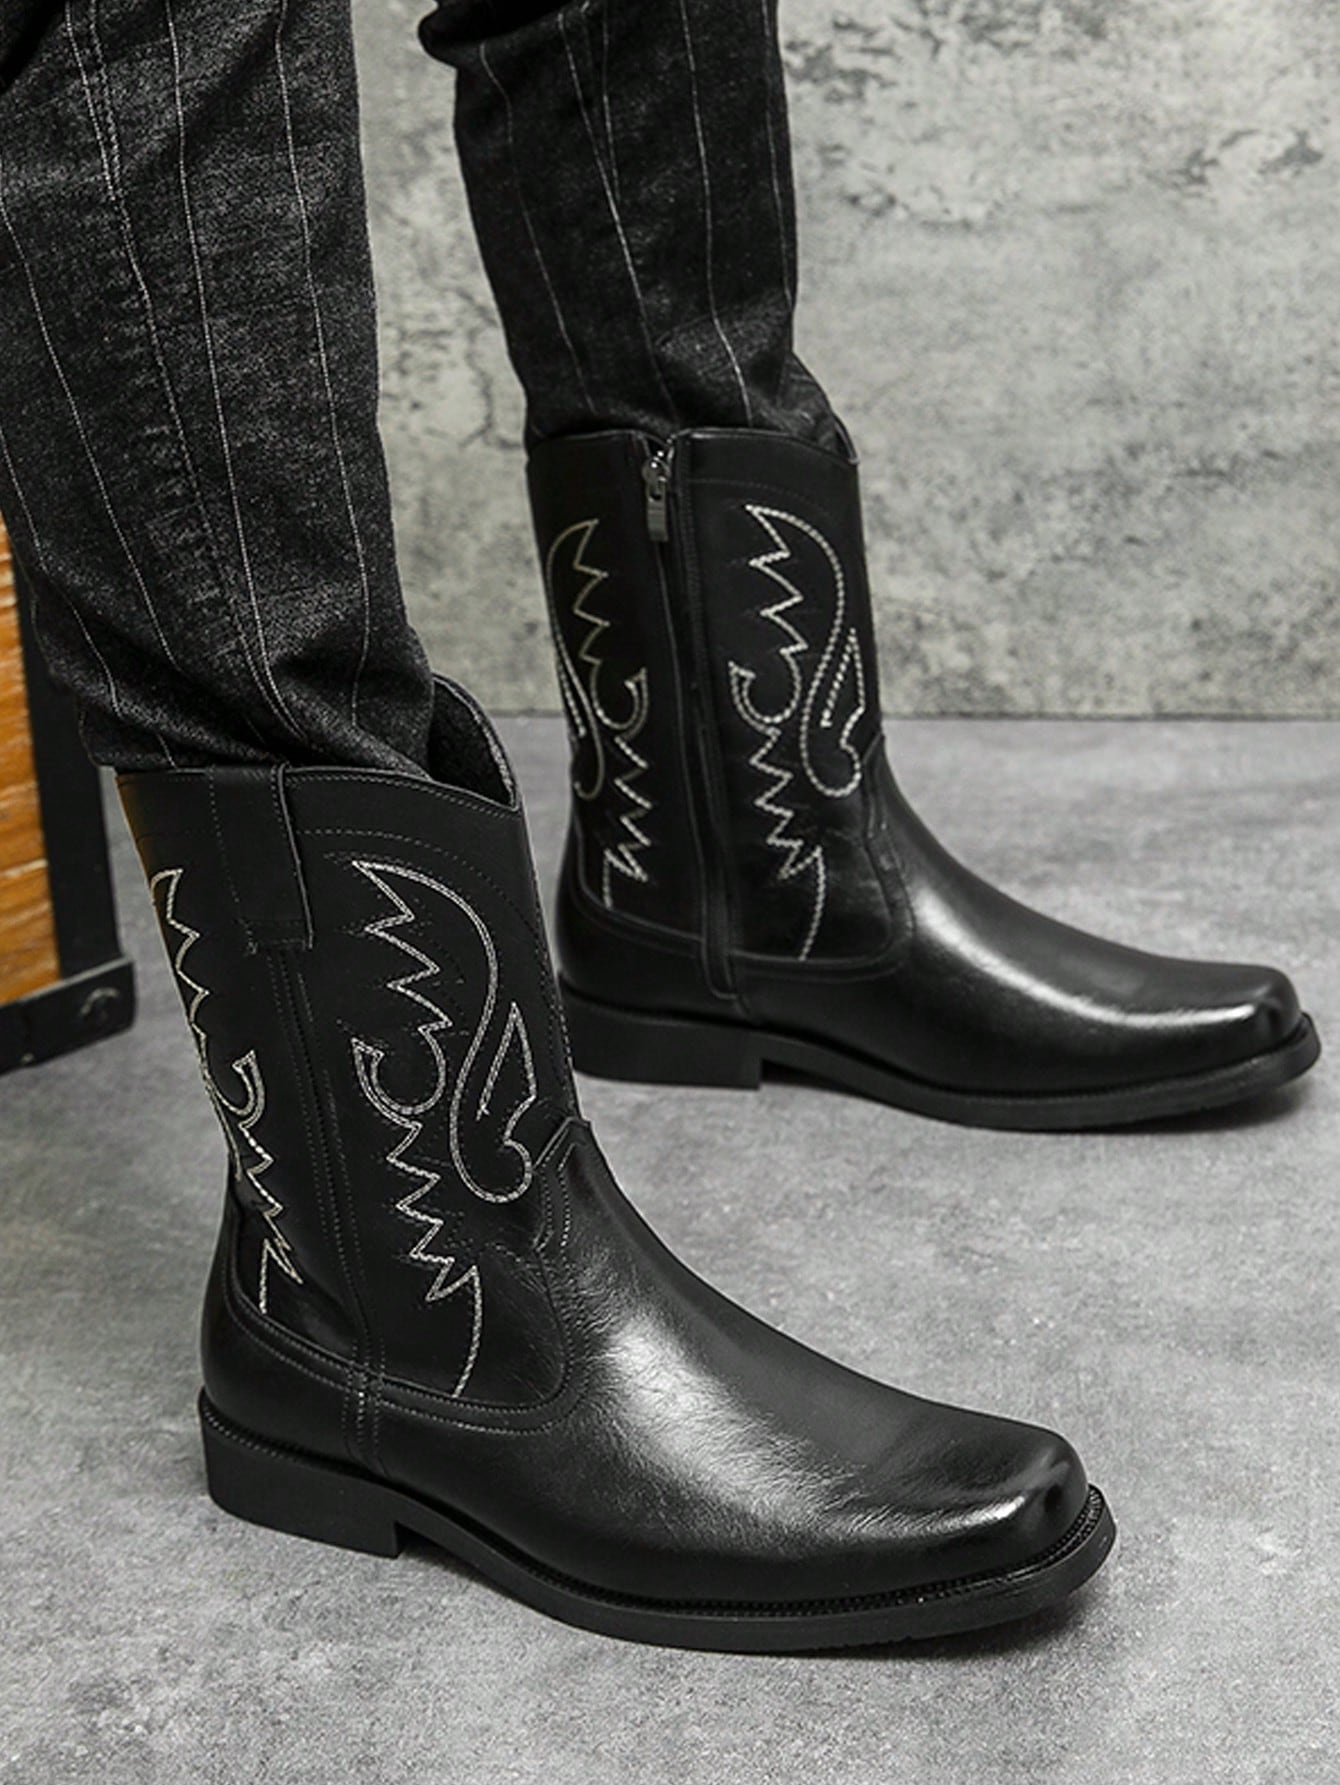 Men's Western Style Embroidered High Top Leather Cowboy Boots